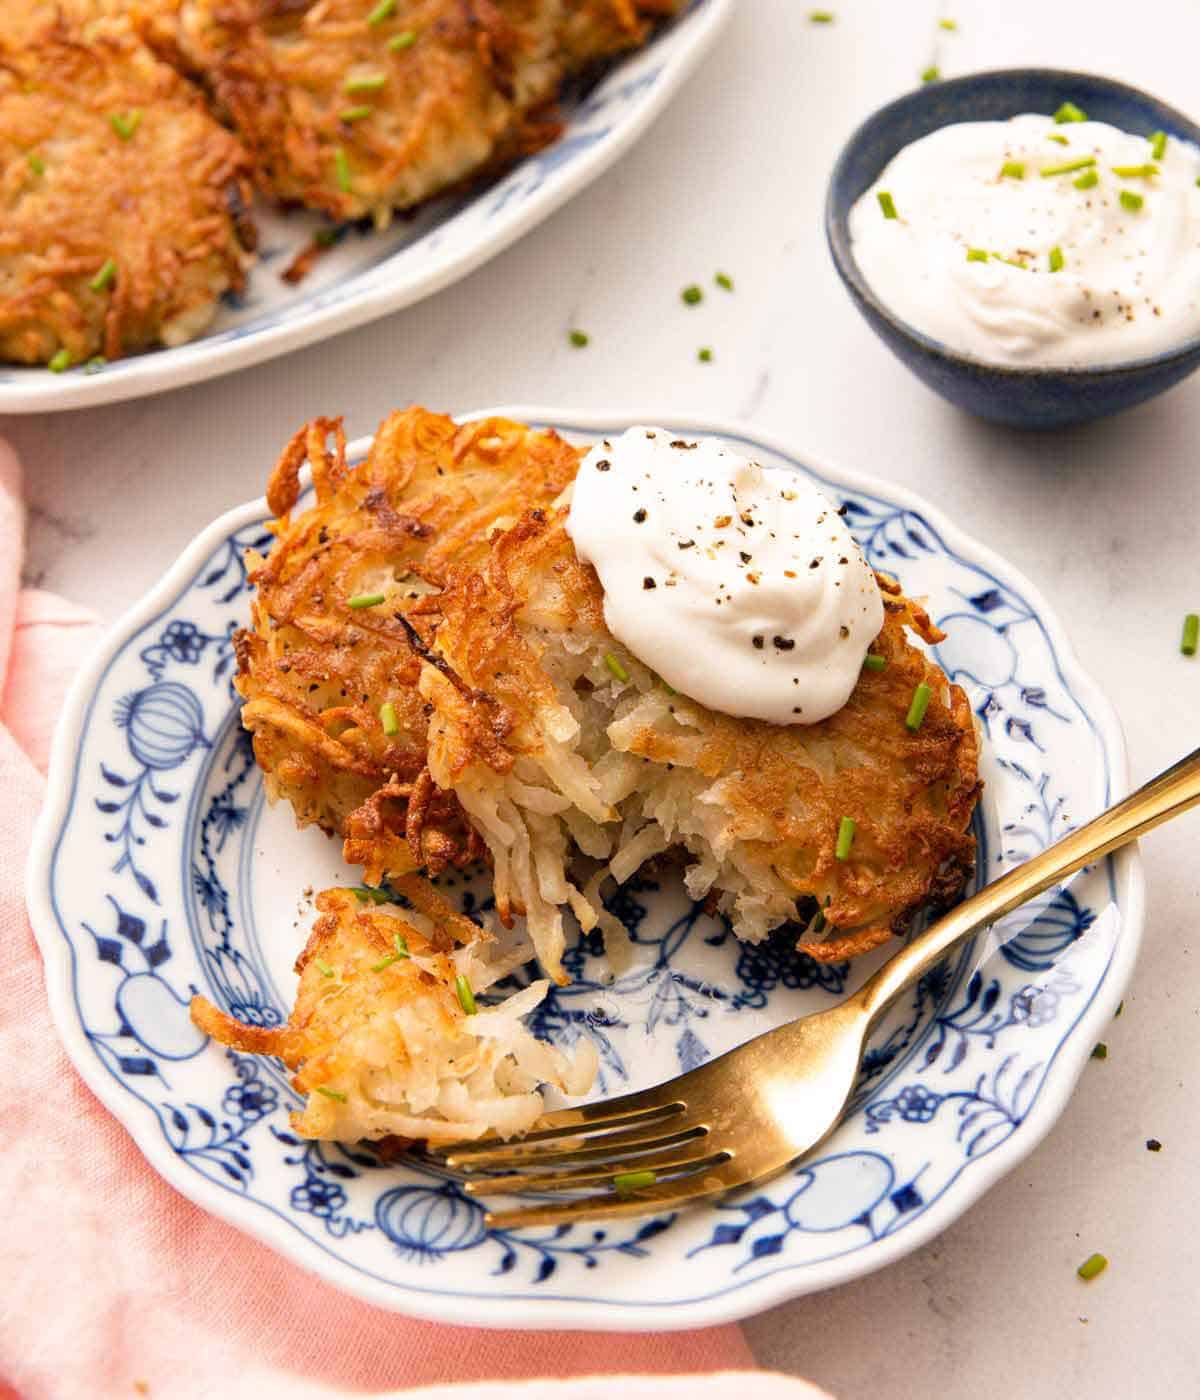 A plate with potato pancakes with sour cream on top with a piece torn off by a fork.